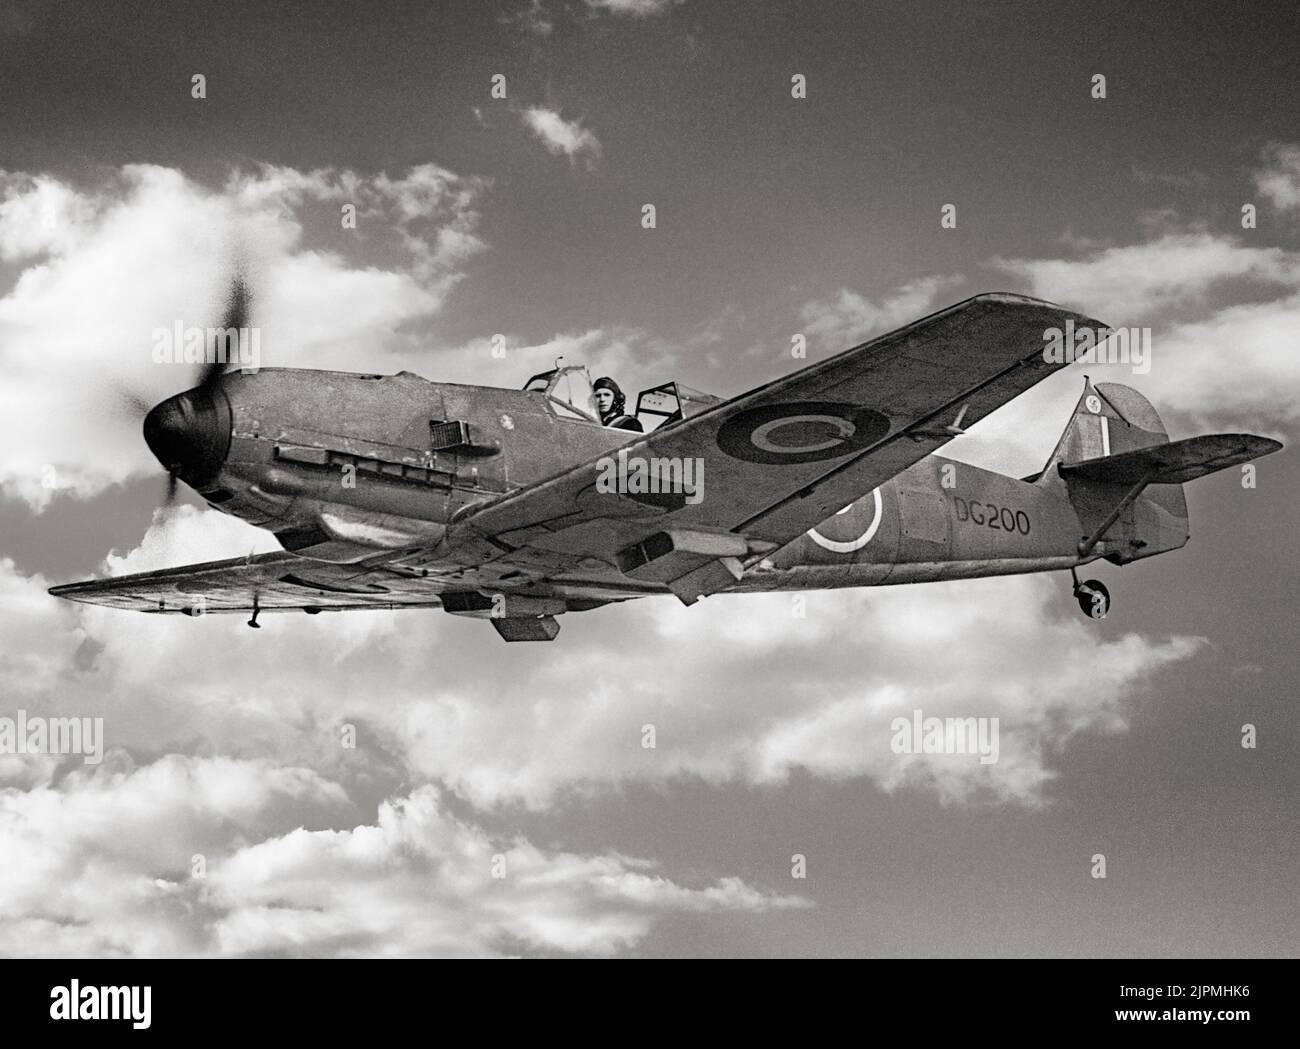 A captured Messerschmitt Bf 109E-3, DG200, in flight while serving with No. 1426 (Enemy Aircraft) Flight. The aircraft was force-landed at Manston, Kent, on 27 November 1940, after being attacked by Supermarine Spitfires of No. 66 Squadron RAF over the Thames estuary. After repair at the Royal Aircraft Establishment it was delivered to Rolls-Royce Ltd in 1941 for engine performance tests. It was later passed to the Aircraft and Armament Experimental Establishment at Boscombe Down, and put into storage. Stock Photo